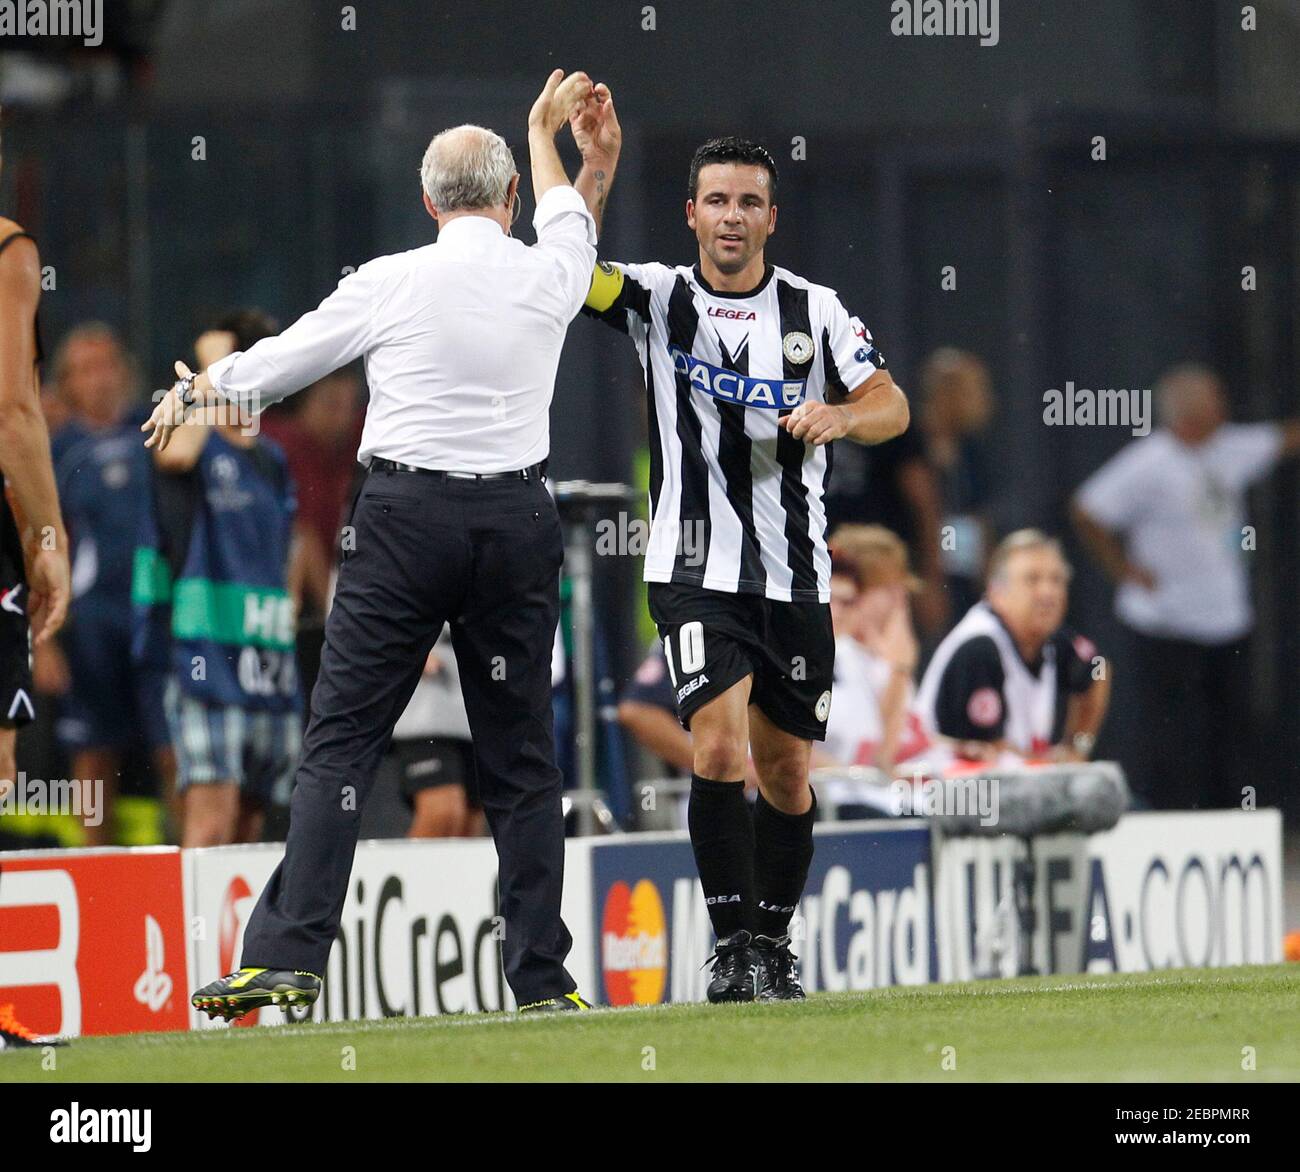 Football - Udinese Calcio v Arsenal UEFA Champions League Play-Off Second  Leg - Stadio Friuli, Udine, Italy - 24/8/11 Antonio Di Natale (R)  celebrates after scoring the first goal for Udinese Mandatory